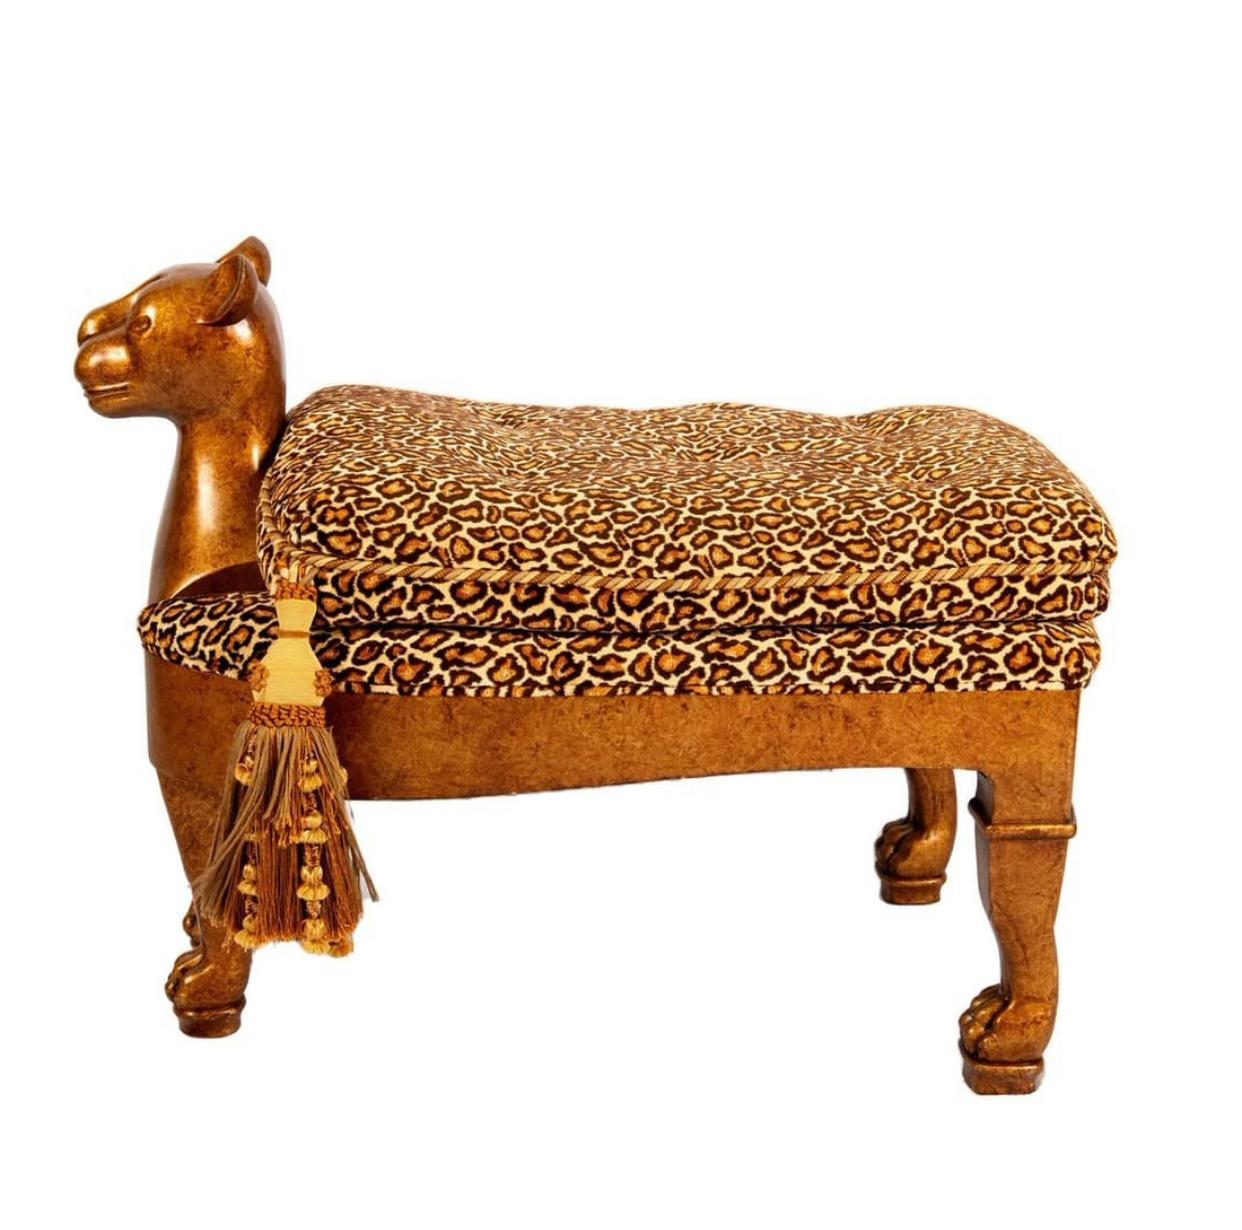 Hand carved and gold leaf finished whimsical wooden bench carved as a majestic cat. The seat is covered in a plush leopard print button tufted upholstery, adorned with a pair of beautiful large Tassels to either side of the neck. 
Dimensions: 38